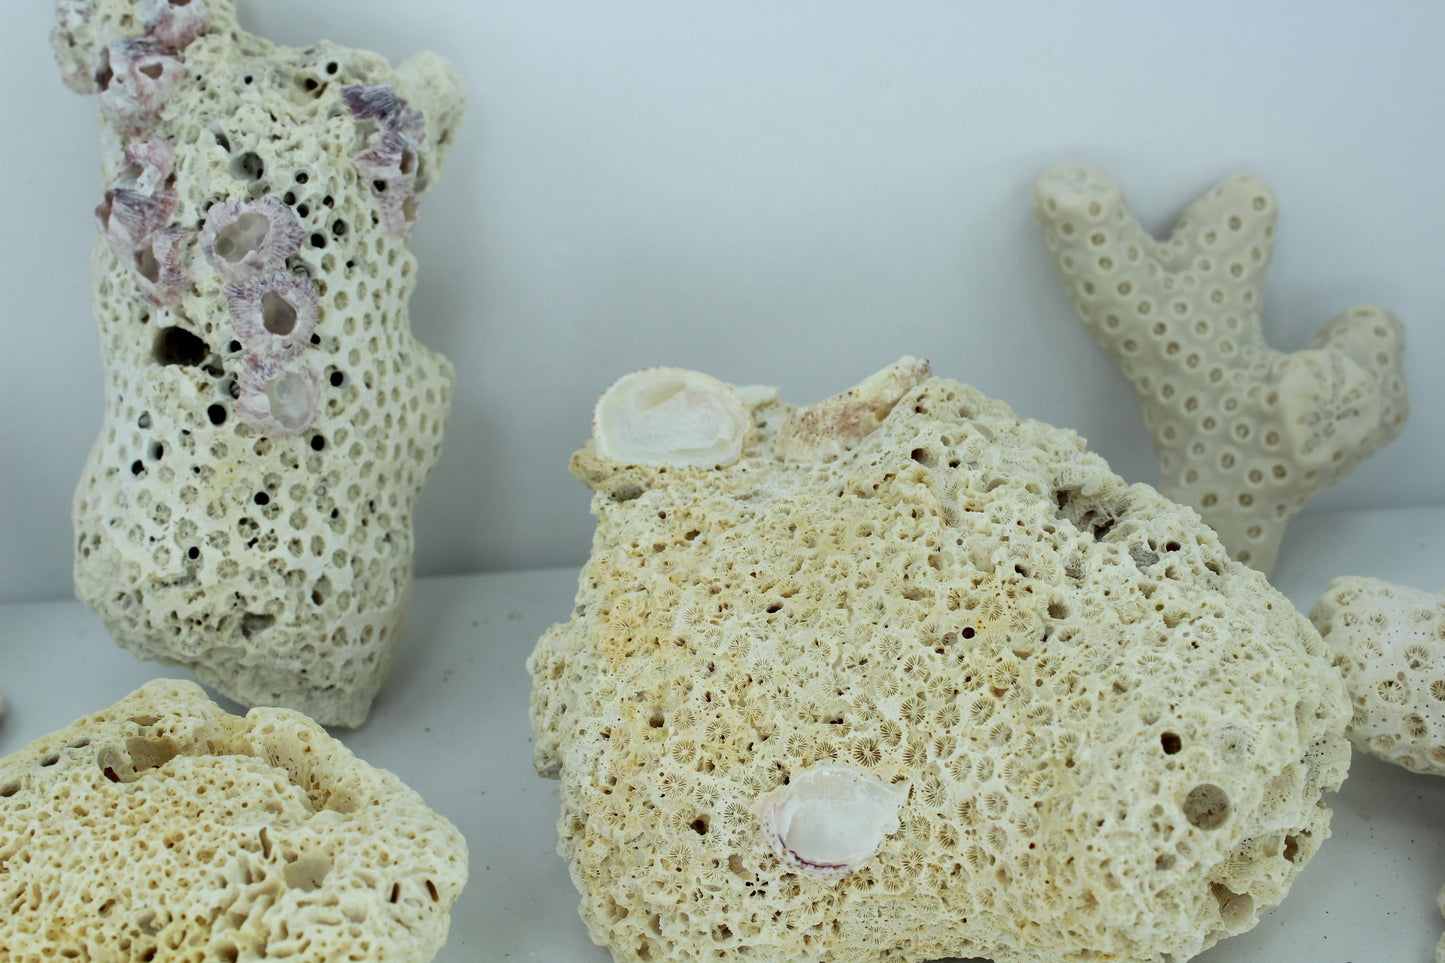 Natural Coral Fossils 6 Unique Pieces 5" to 3" Barnacles Estate Collection Aquarium Shell Art Collectibles unusual